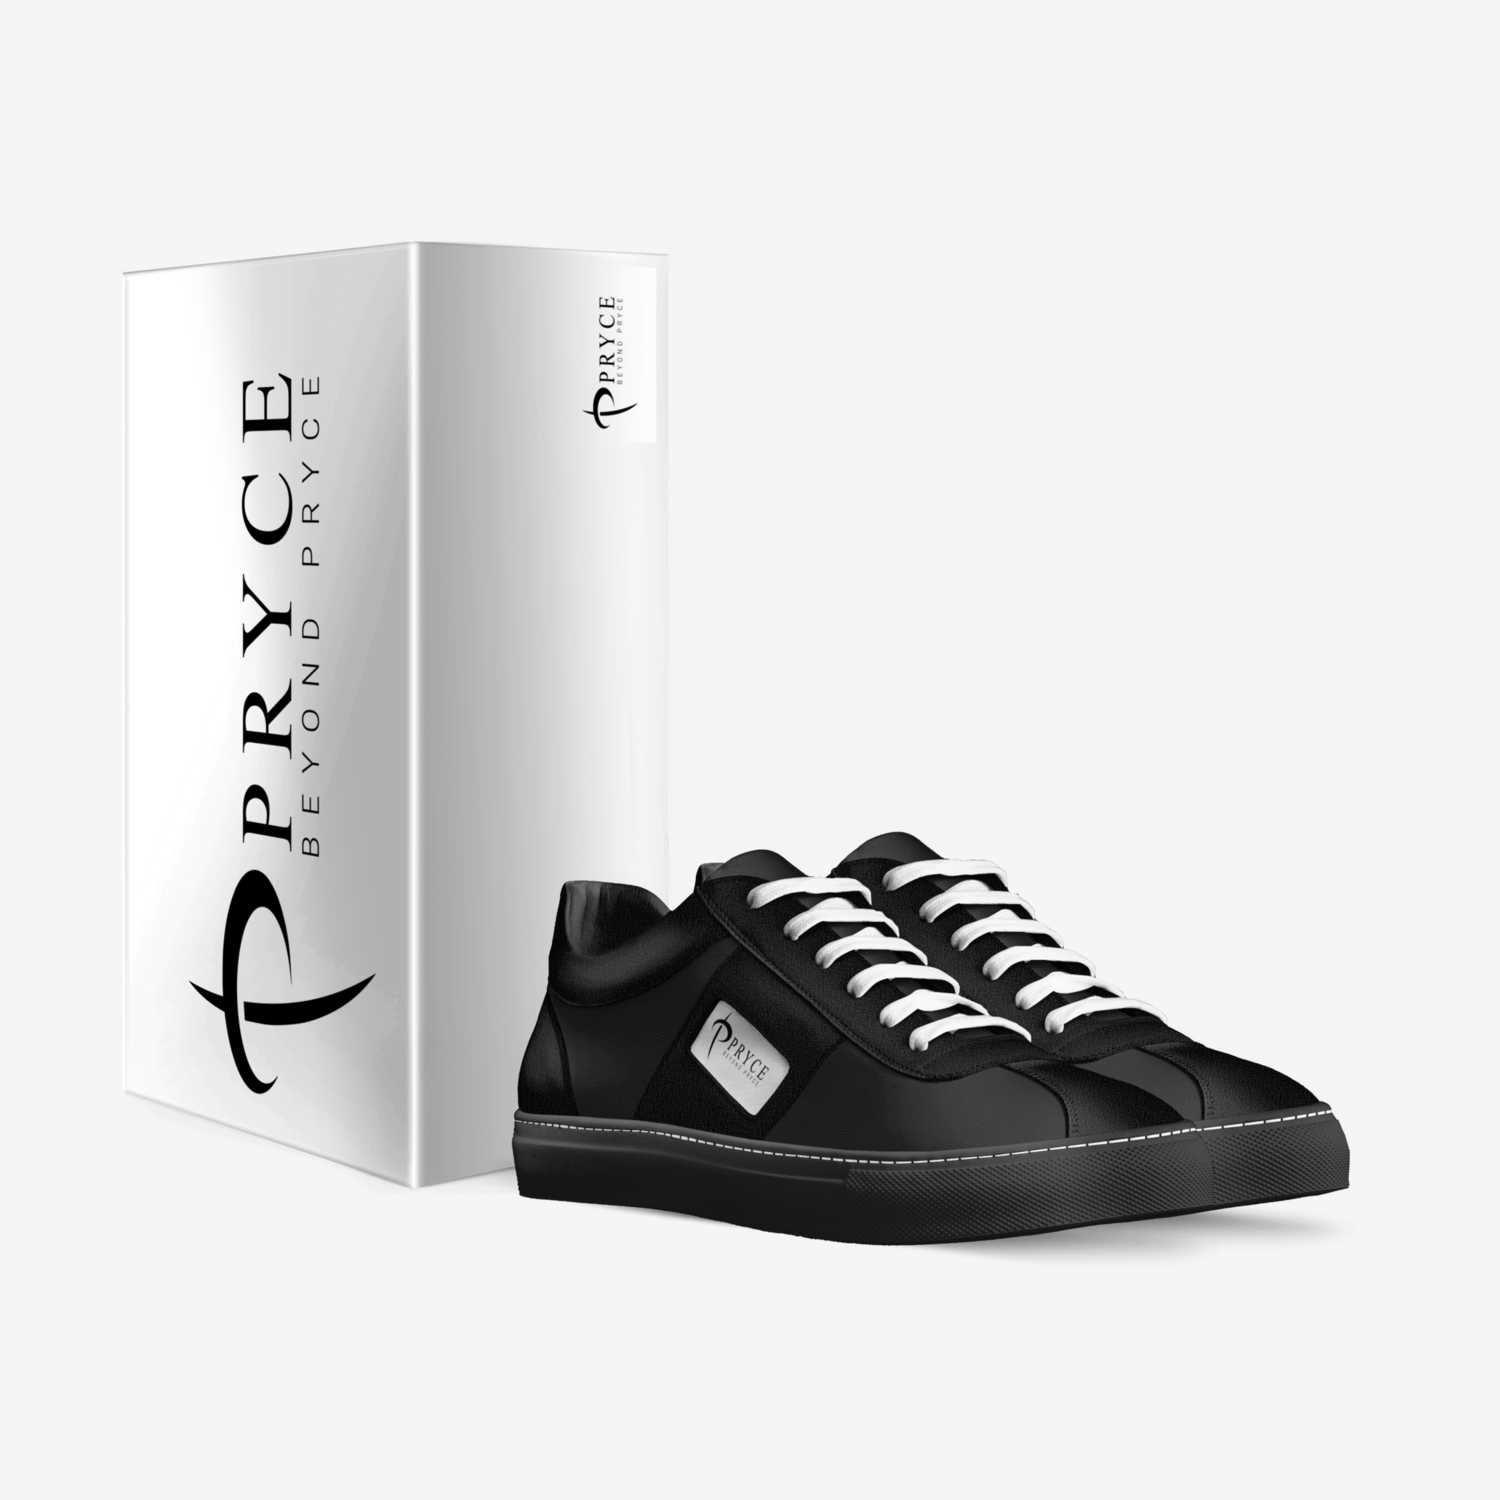 Pryce custom made in Italy shoes by Erica Jackson | Box view